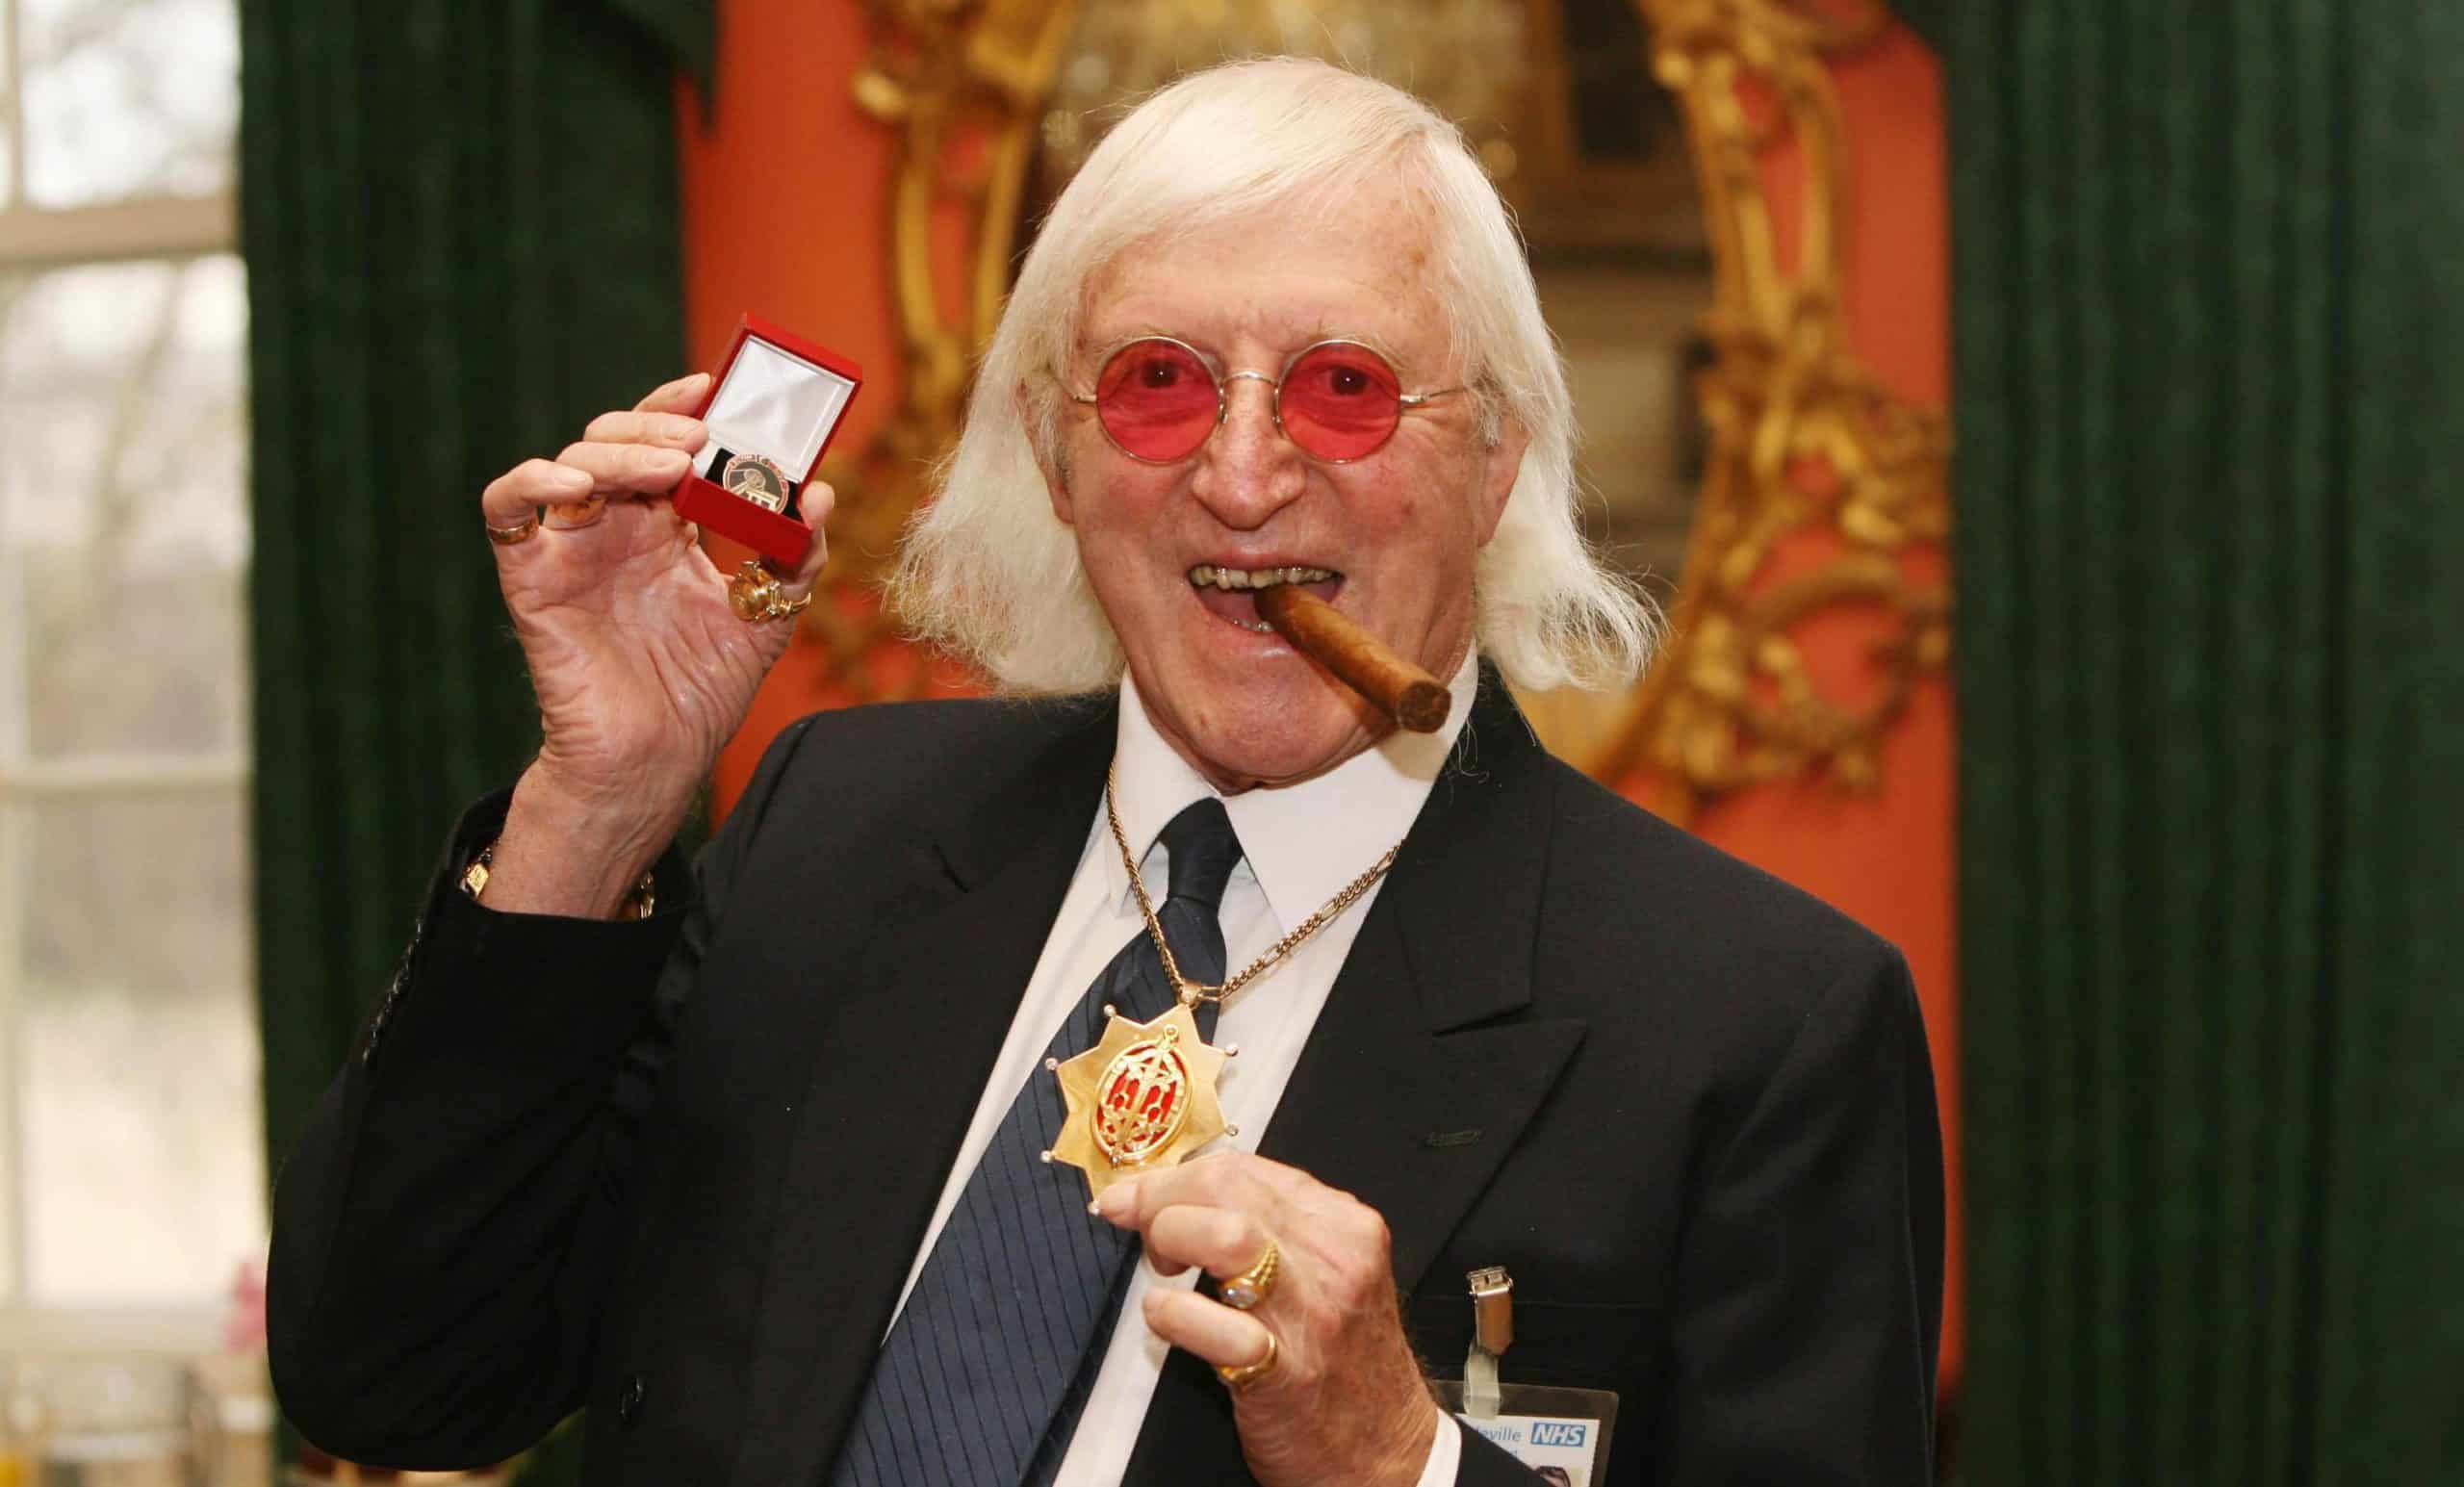 Prince Charles begged Jimmy Savile for PR help – newly released letters reveal